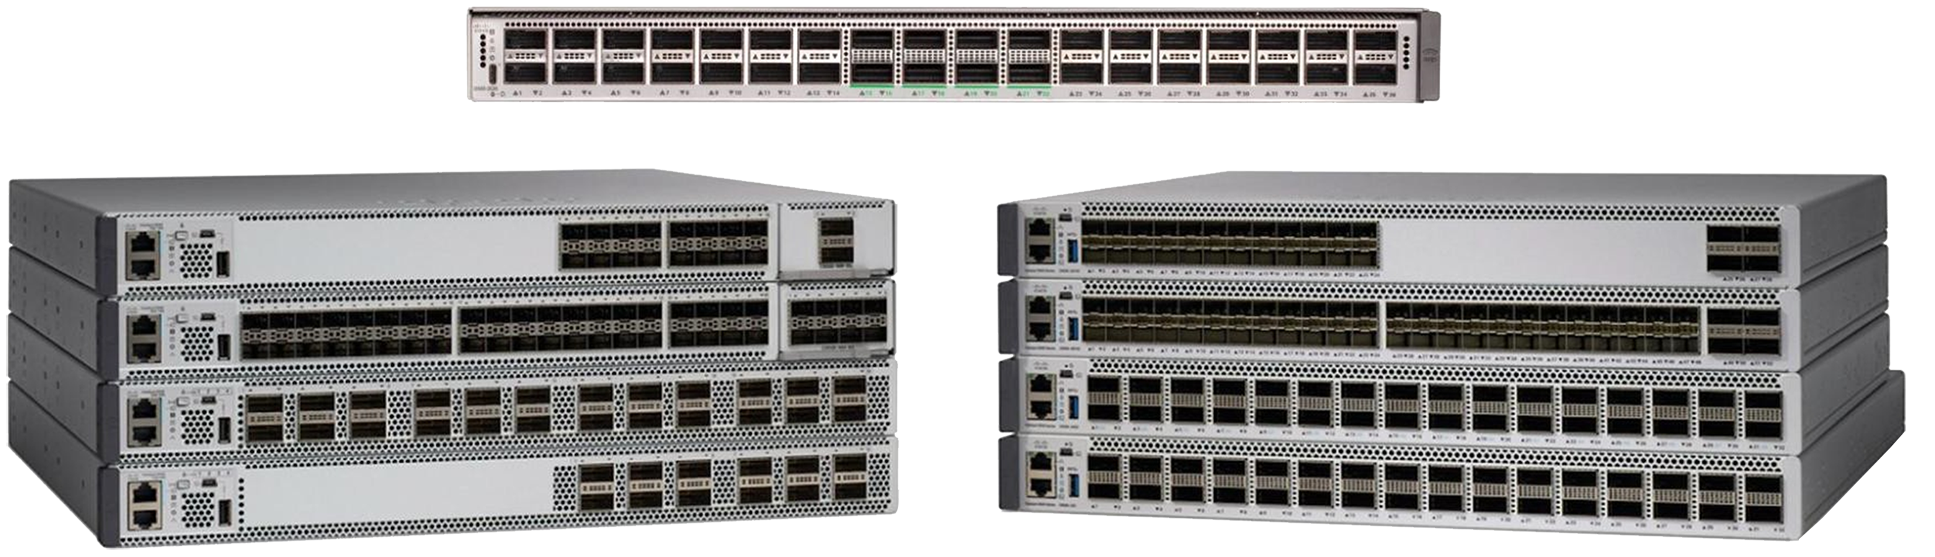 Catalyst 9500 Series Switches